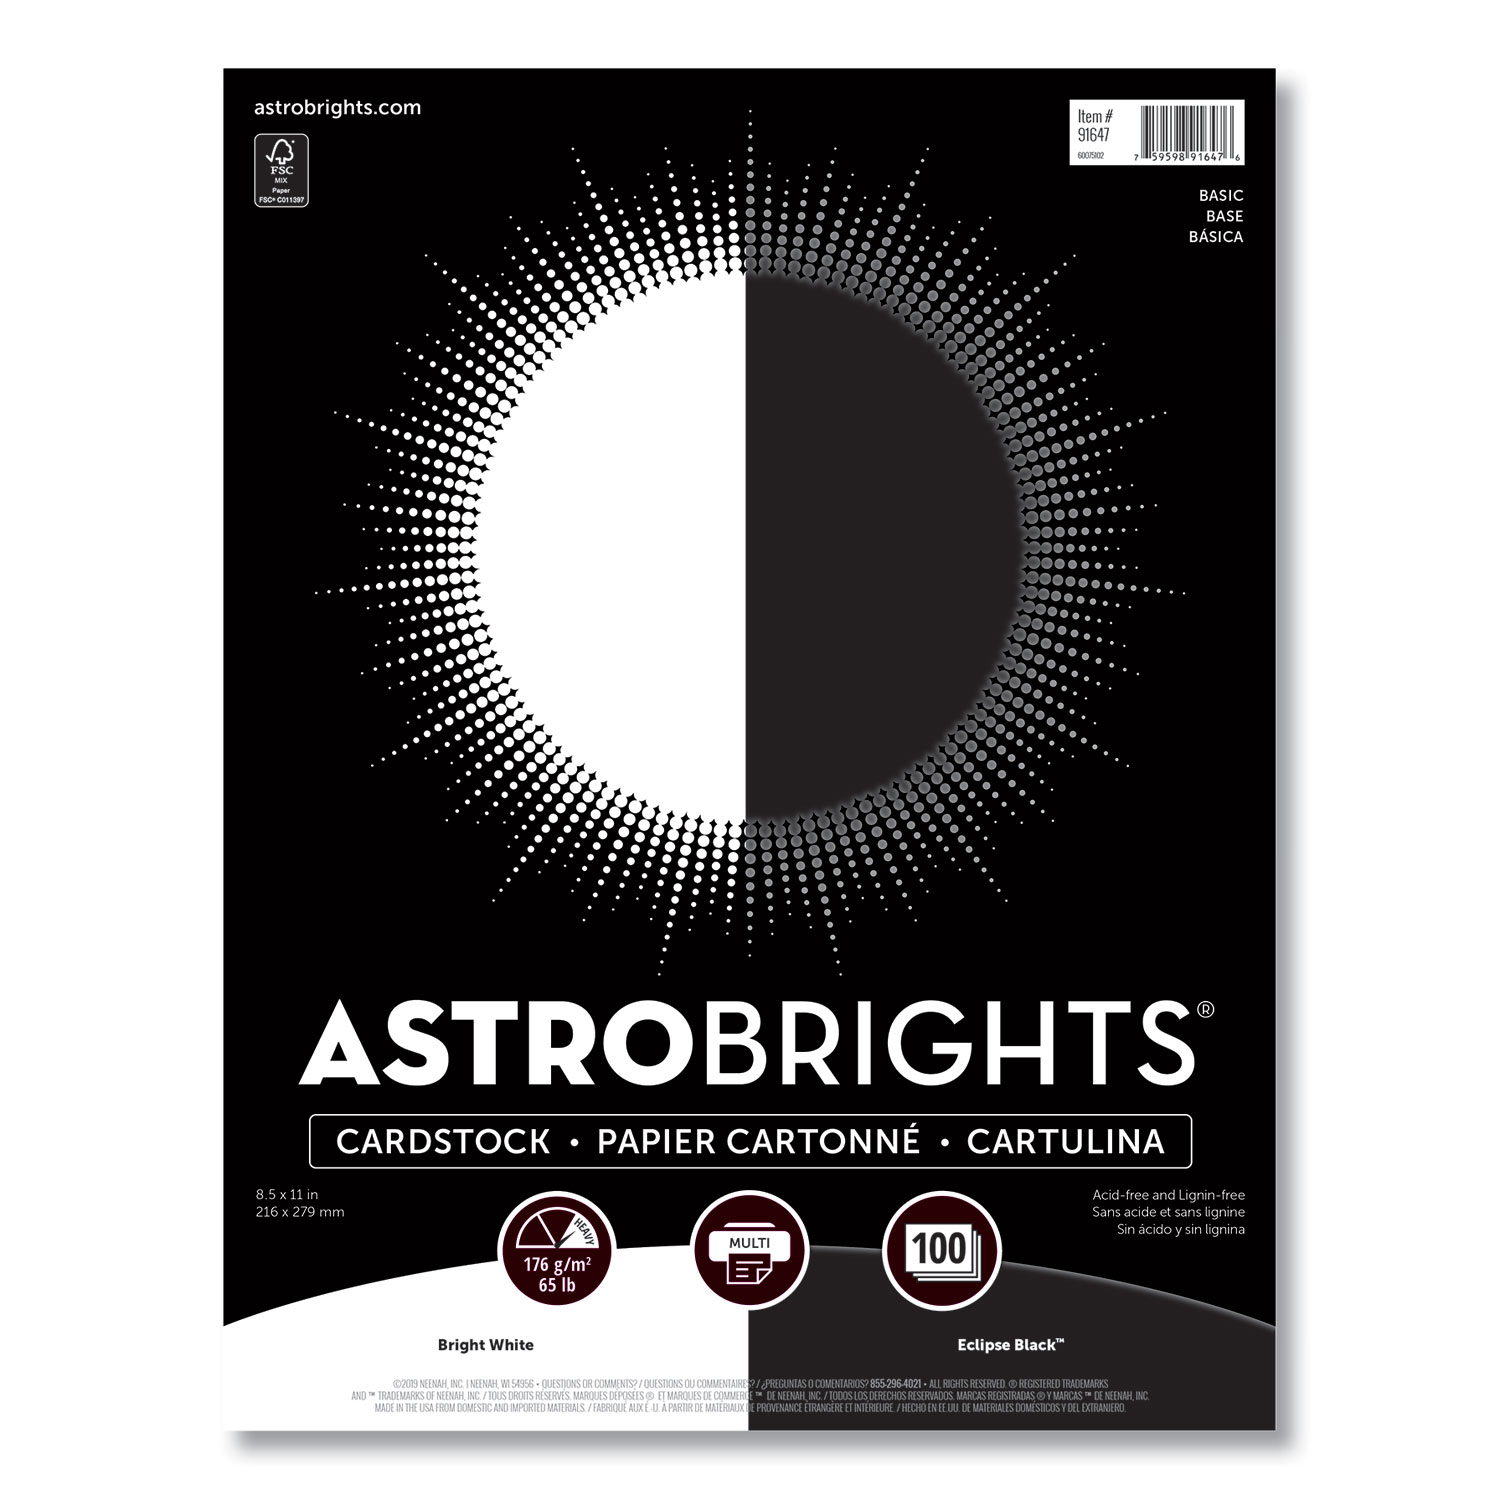  Astrobrights 91647 Color Cardstock - Basic Assortment, 65 lb, 8.5 x 11, Assorted Basic Colors, 100/Pack (WAU24396495) 